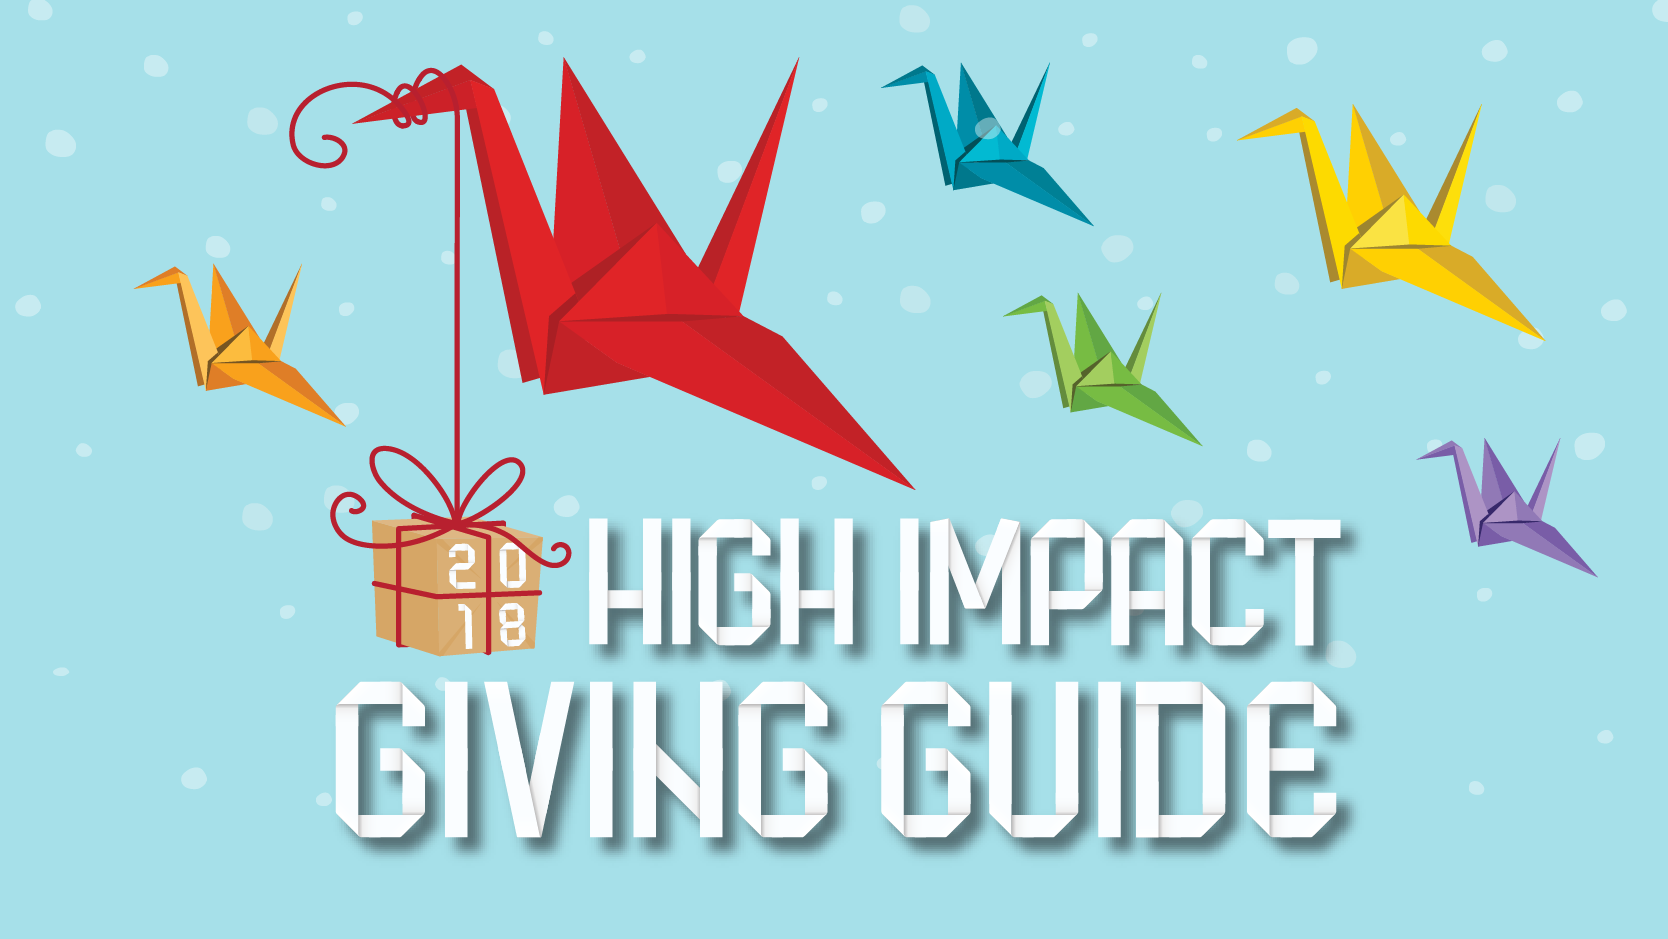 2018 High Impact Giving Guide Giving title